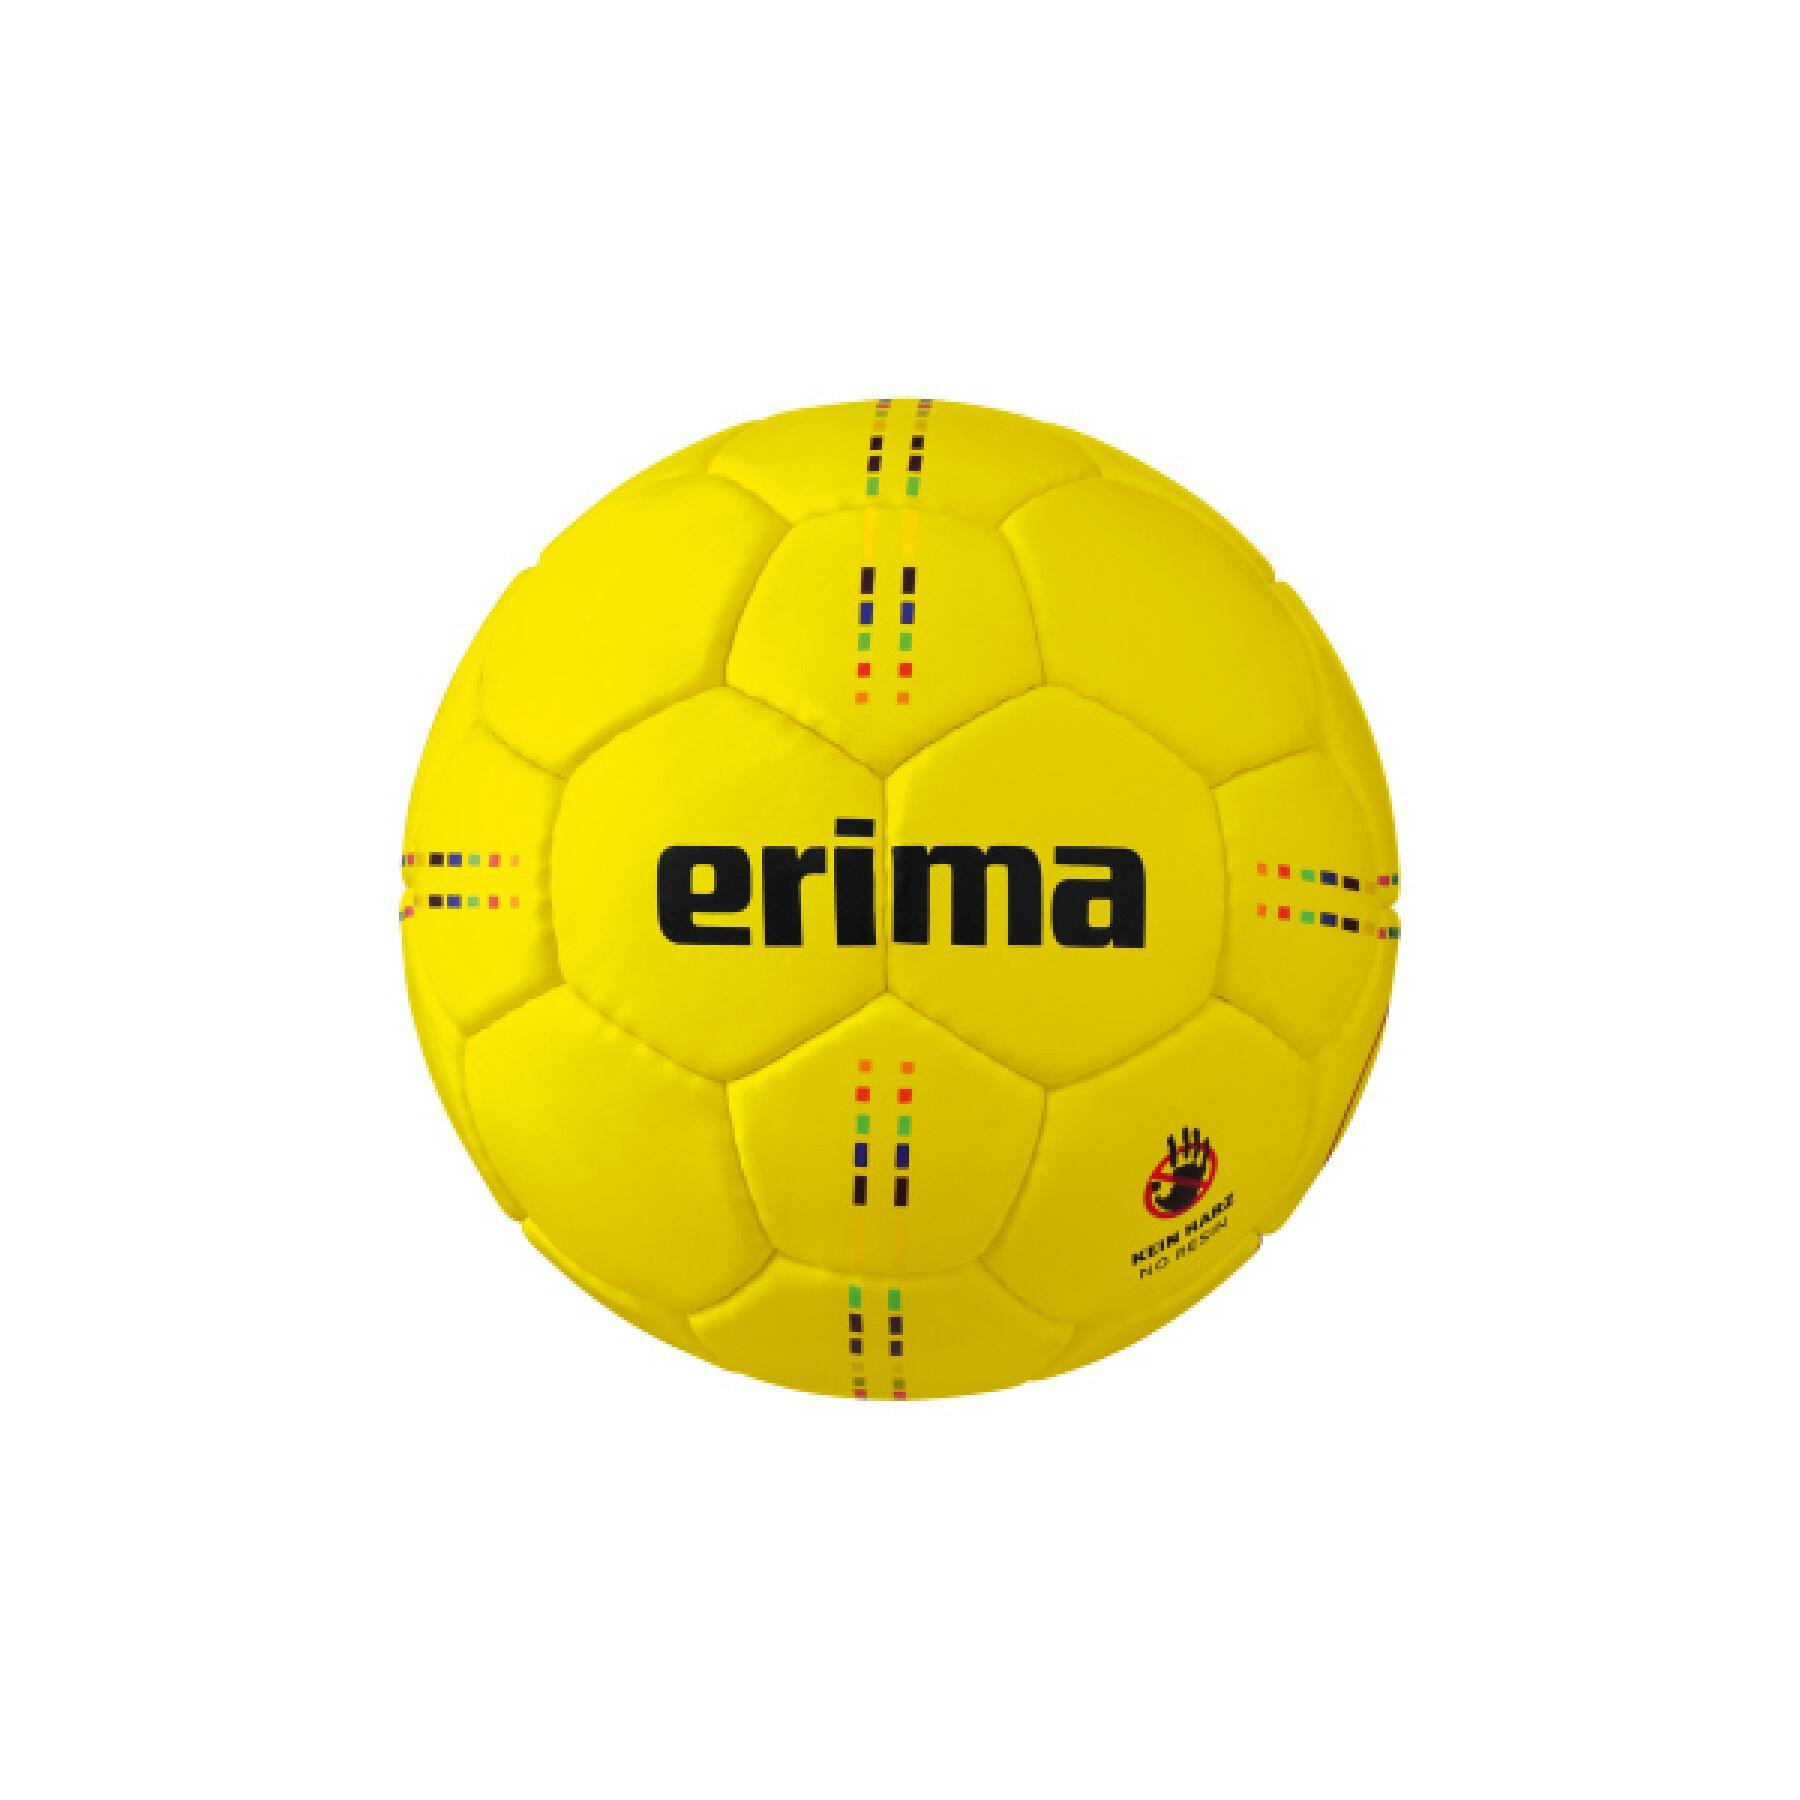 Ball without resin Erima PURE GRIP No. 5